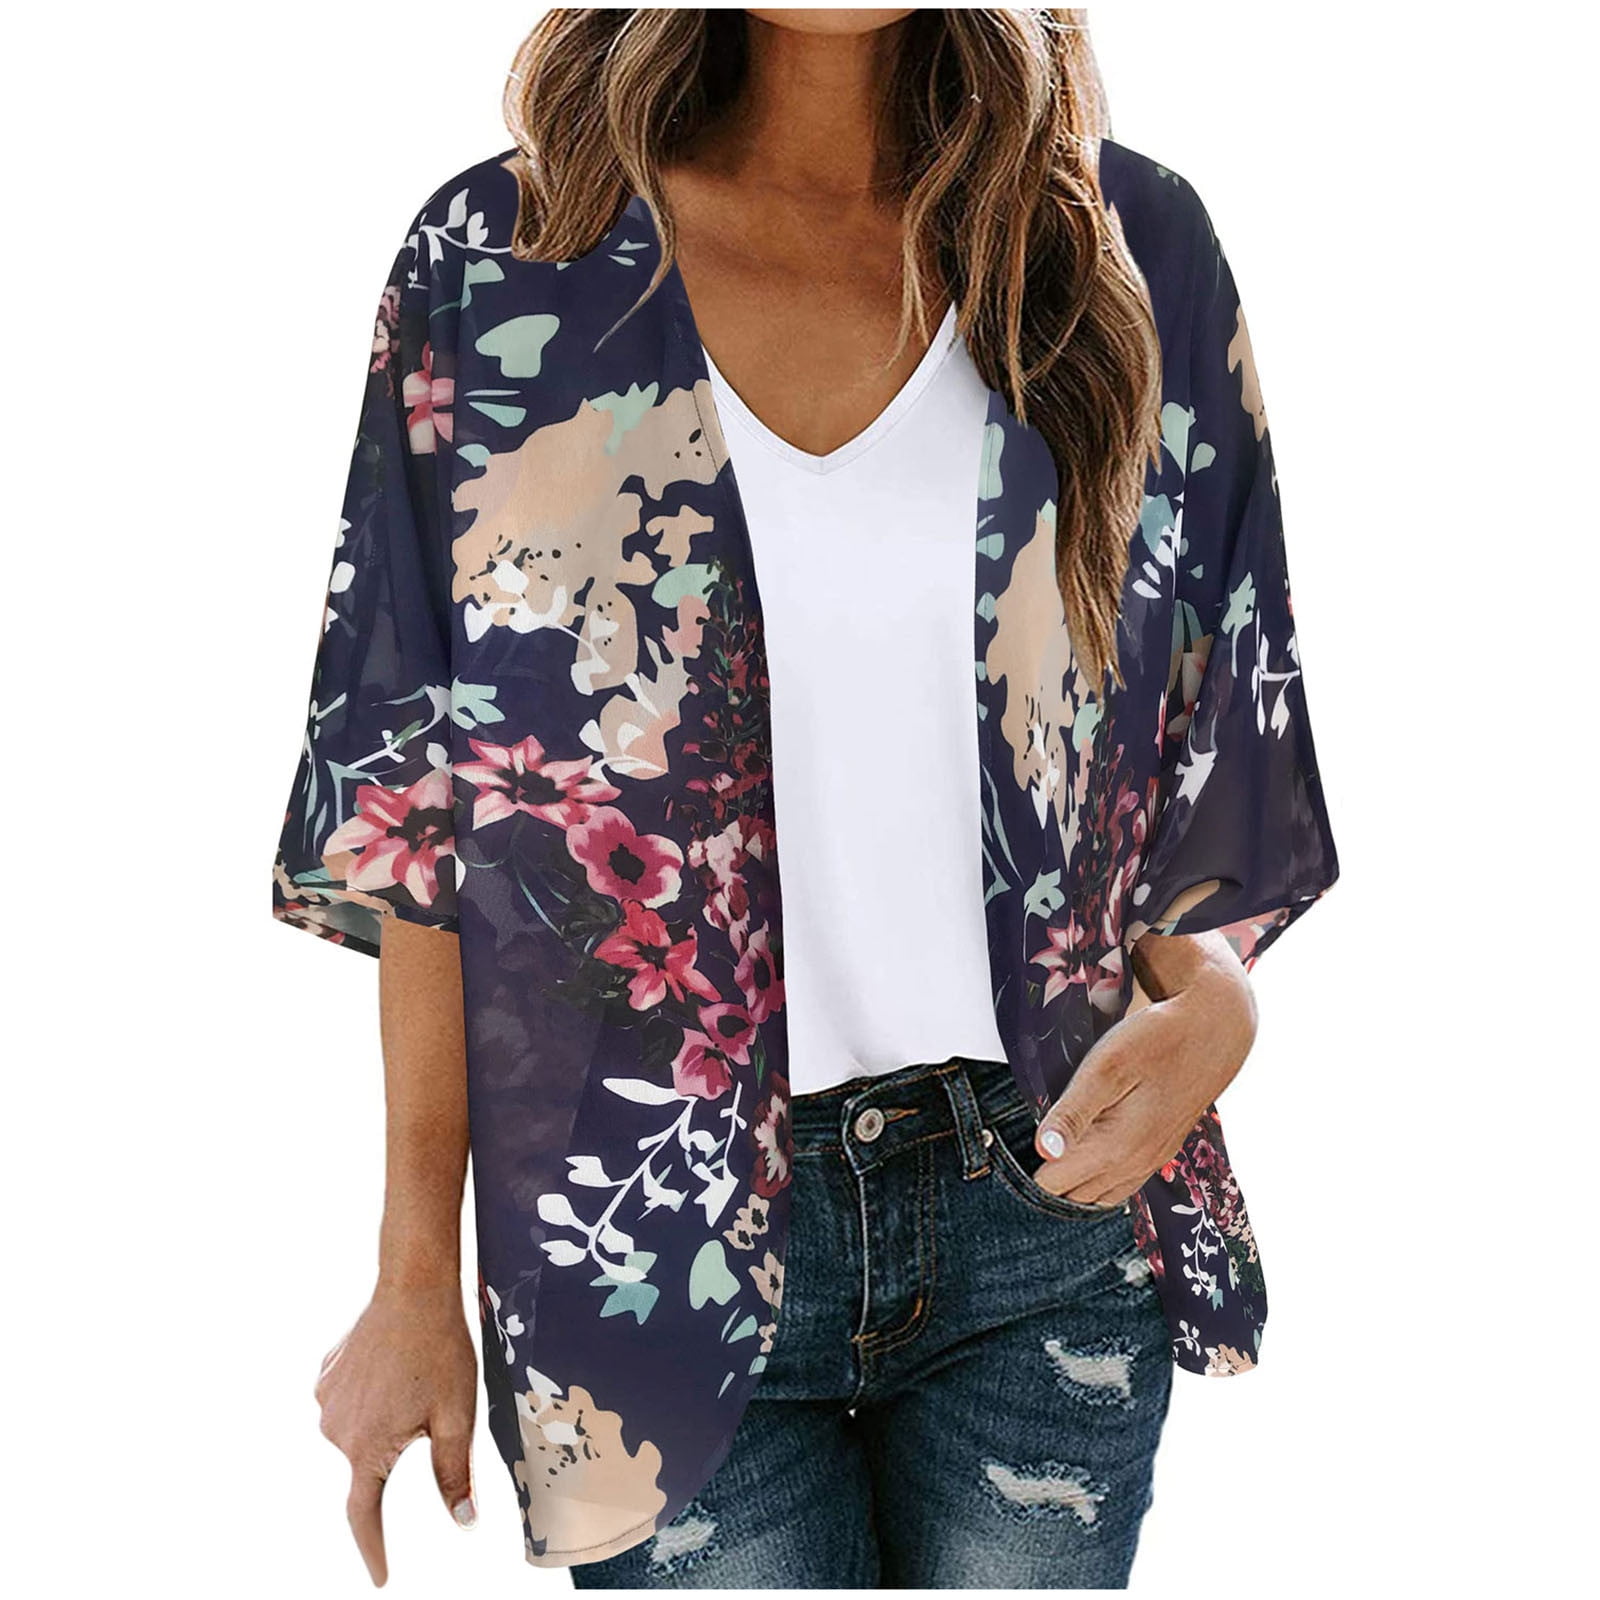 Chiffon Kimono Cardigan for Women Half Bell Sleeve Loose Beach Lightweight  Floral Print Cover Up Blouse Tops (Large, Navy)